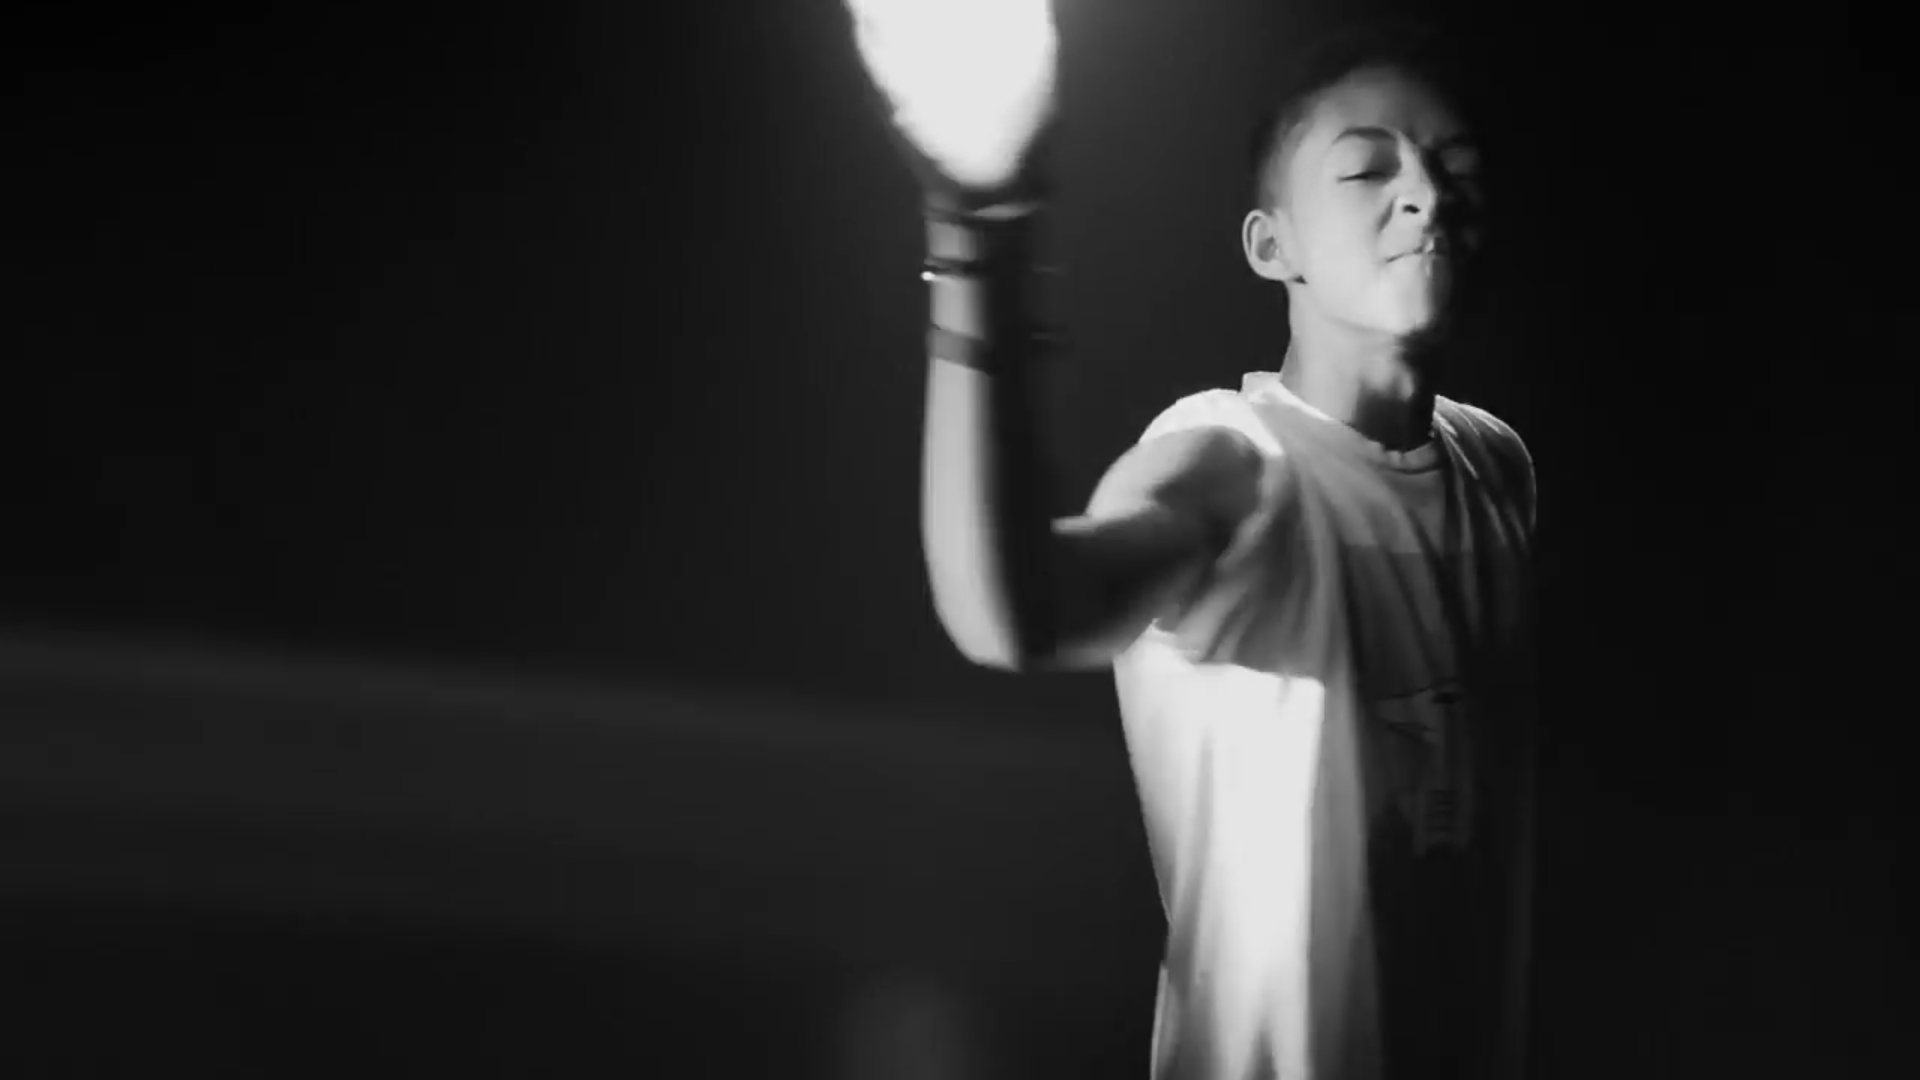 Picture Of Jaden Smith In Music Video Give It To Em Jaden Smith 1643440879 Teen Idols 4 You 2479